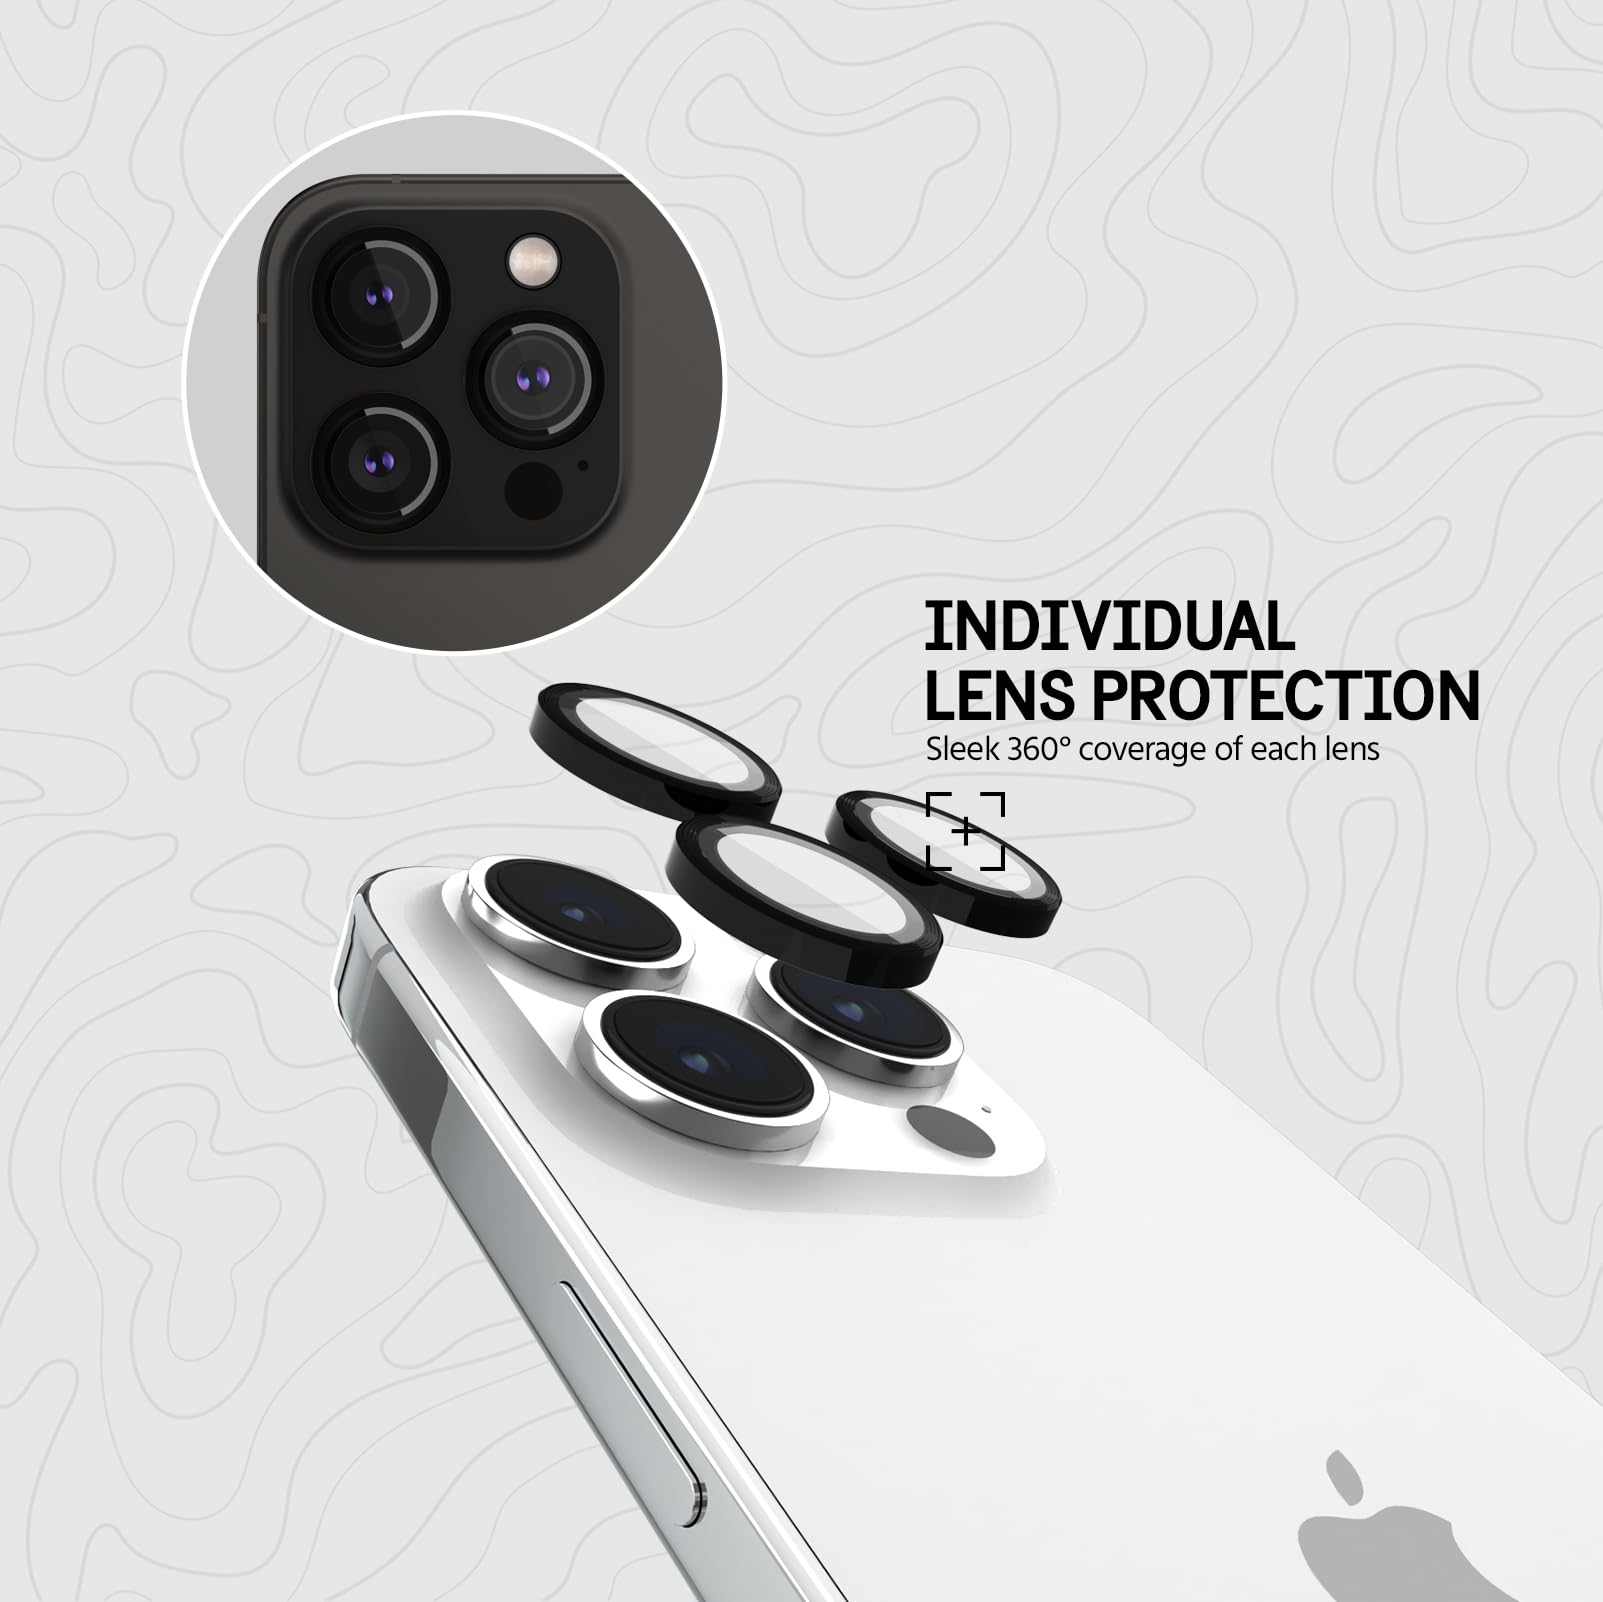 Pelican iPhone 15 Pro/iPhone 15 Pro Max Camera Lens Protector w/Aluminum Rings - 9H Tempered Glass - Durable Anti-Scratch, Anti-Shatter, HD View w/Night Shoot, Case Friendly, Easy Install - Black